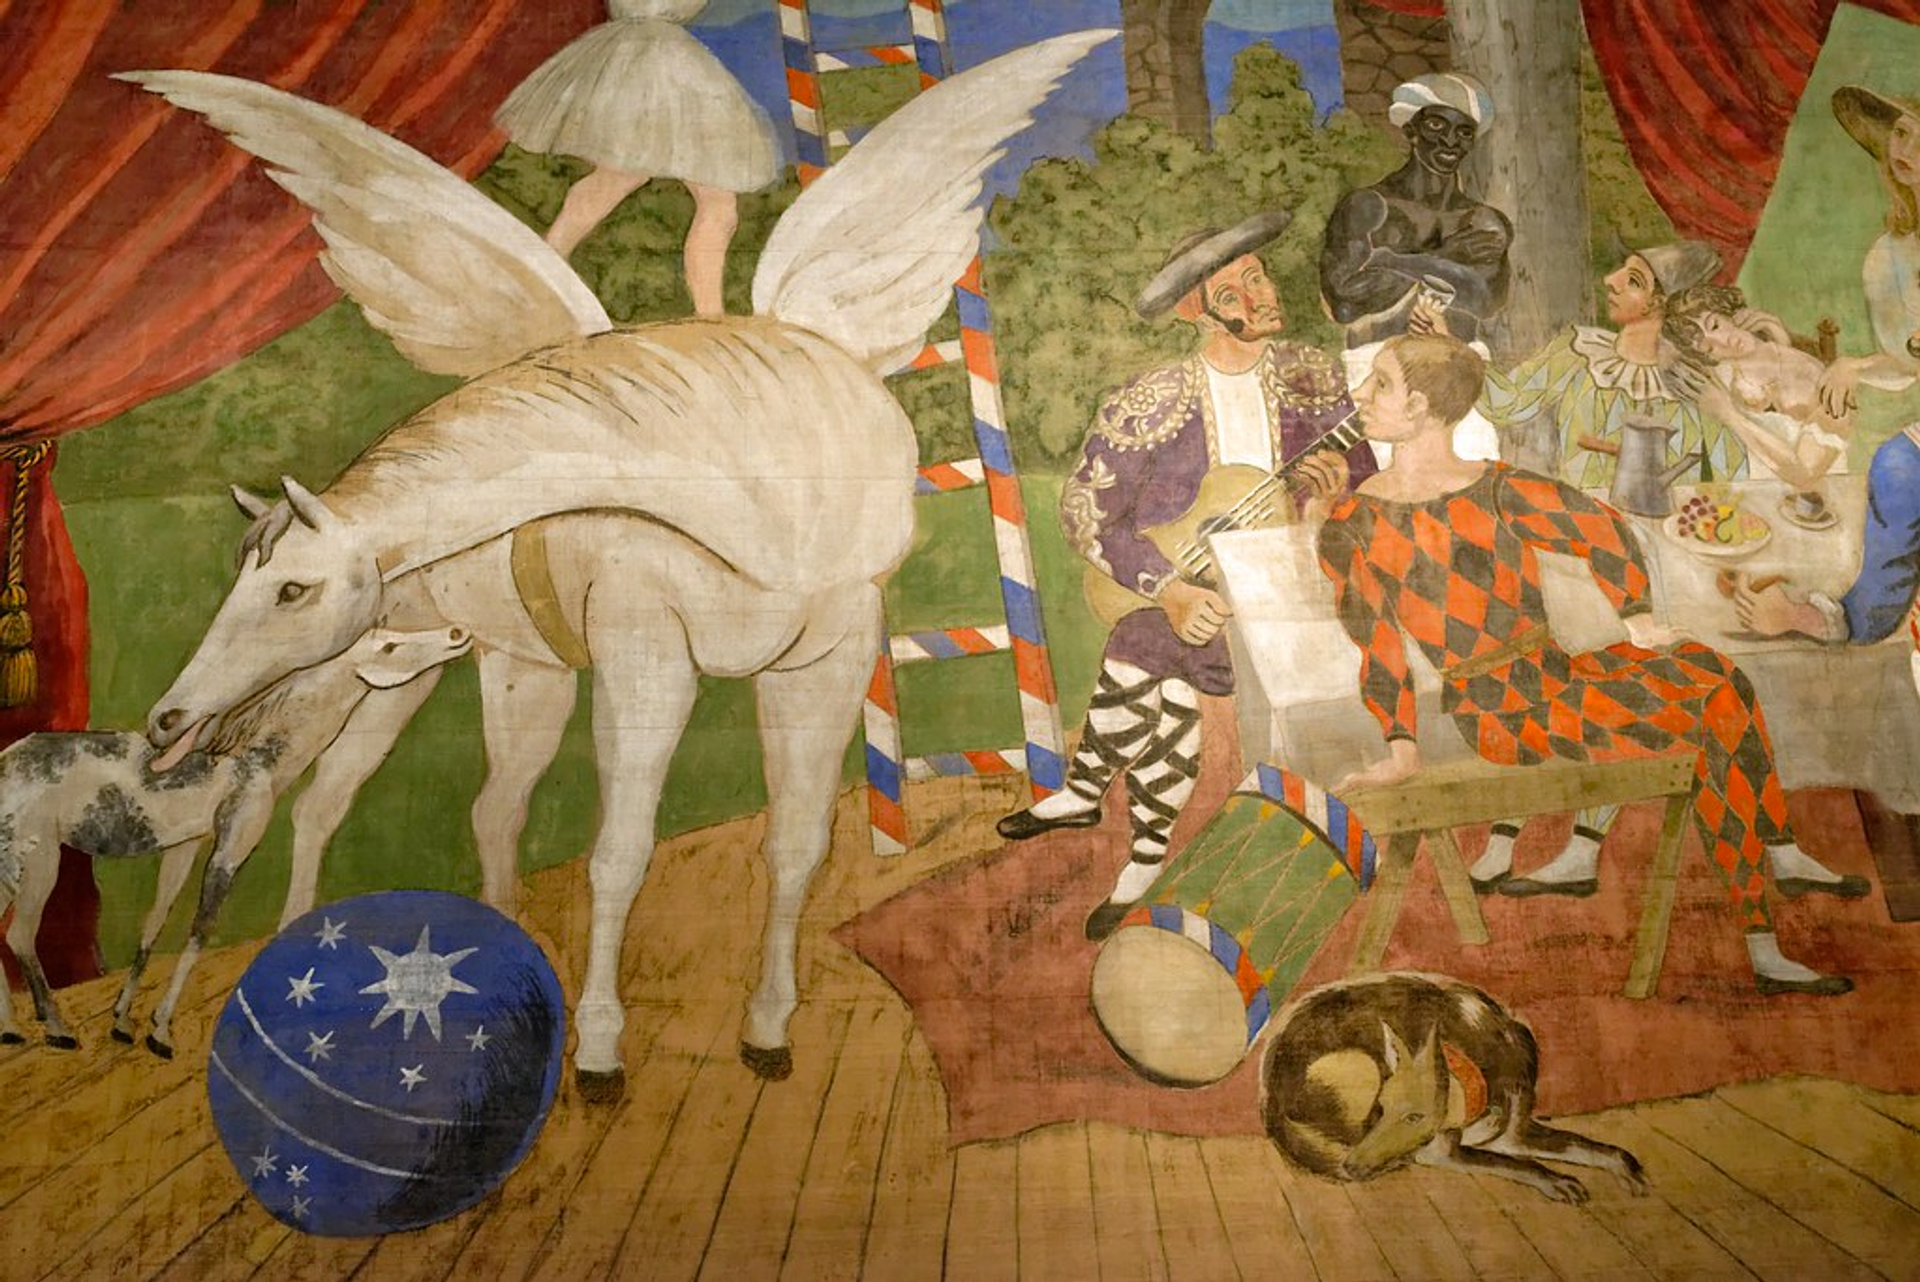 This curtain, painted by Pablo Picasso, shows a group of performers on a stage while, to the left, a winged mare stands to the left with a suckling foal and a fairy perched on its back.